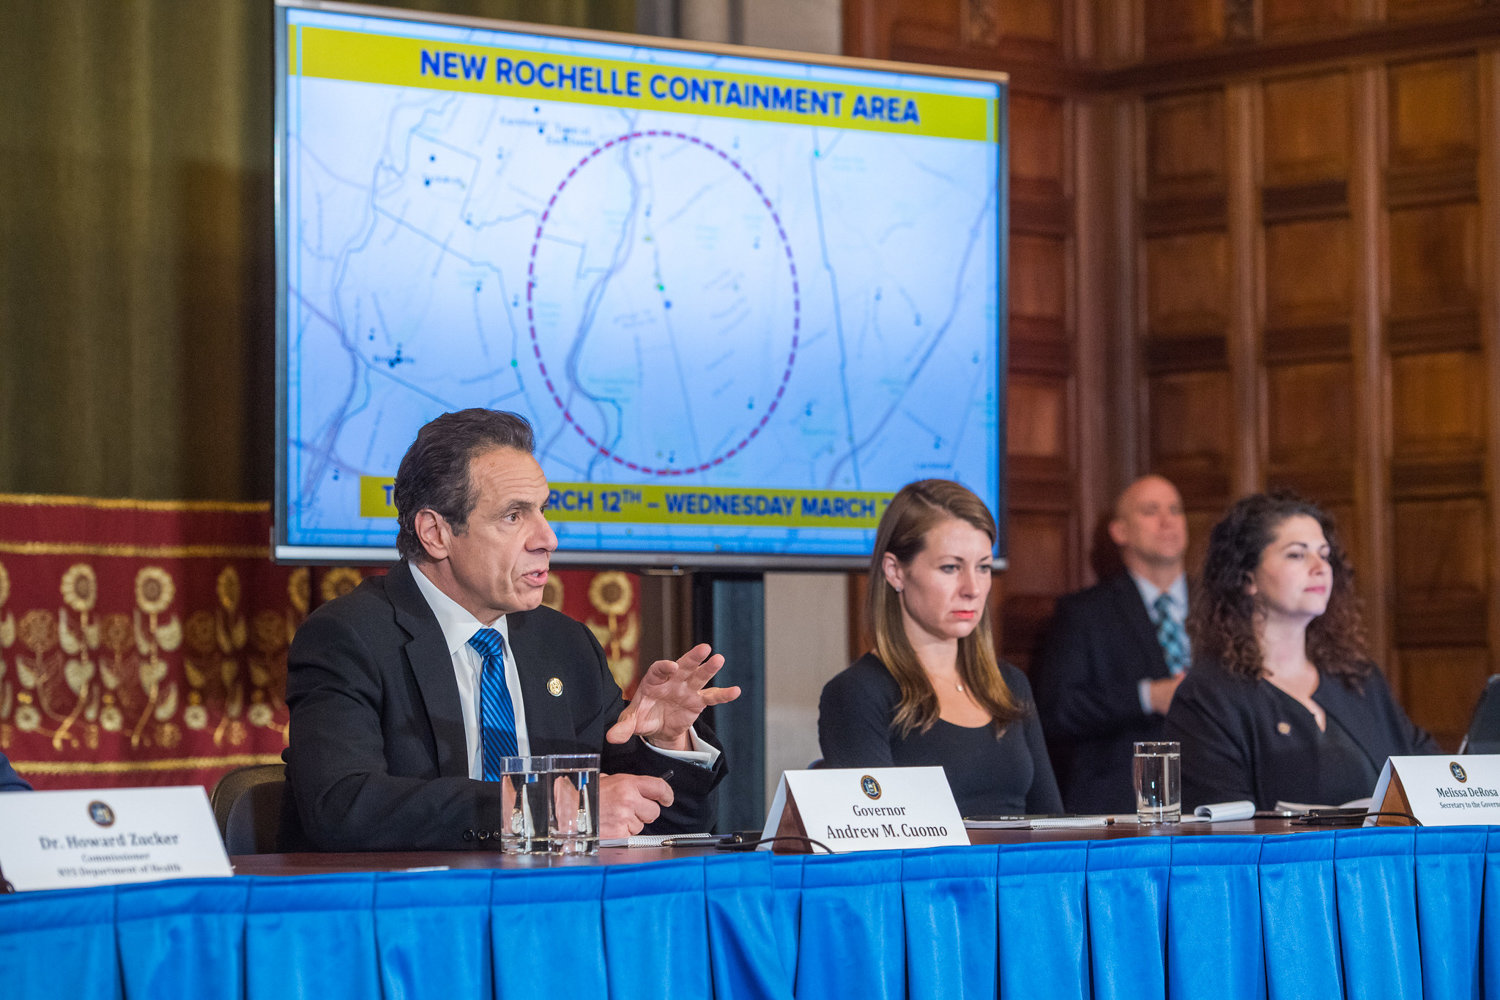 Gov. Andrew Cuomo announces he's shutting down what would become New York's first coronavirus hotspot around New Rochelle on March 10. At the same time, Mayor Bill de Blasio was getting his first warnings from city health commissioner Oxiris Barbot about the need to start shutting some services down — recommendations de Blasio initially resisted.